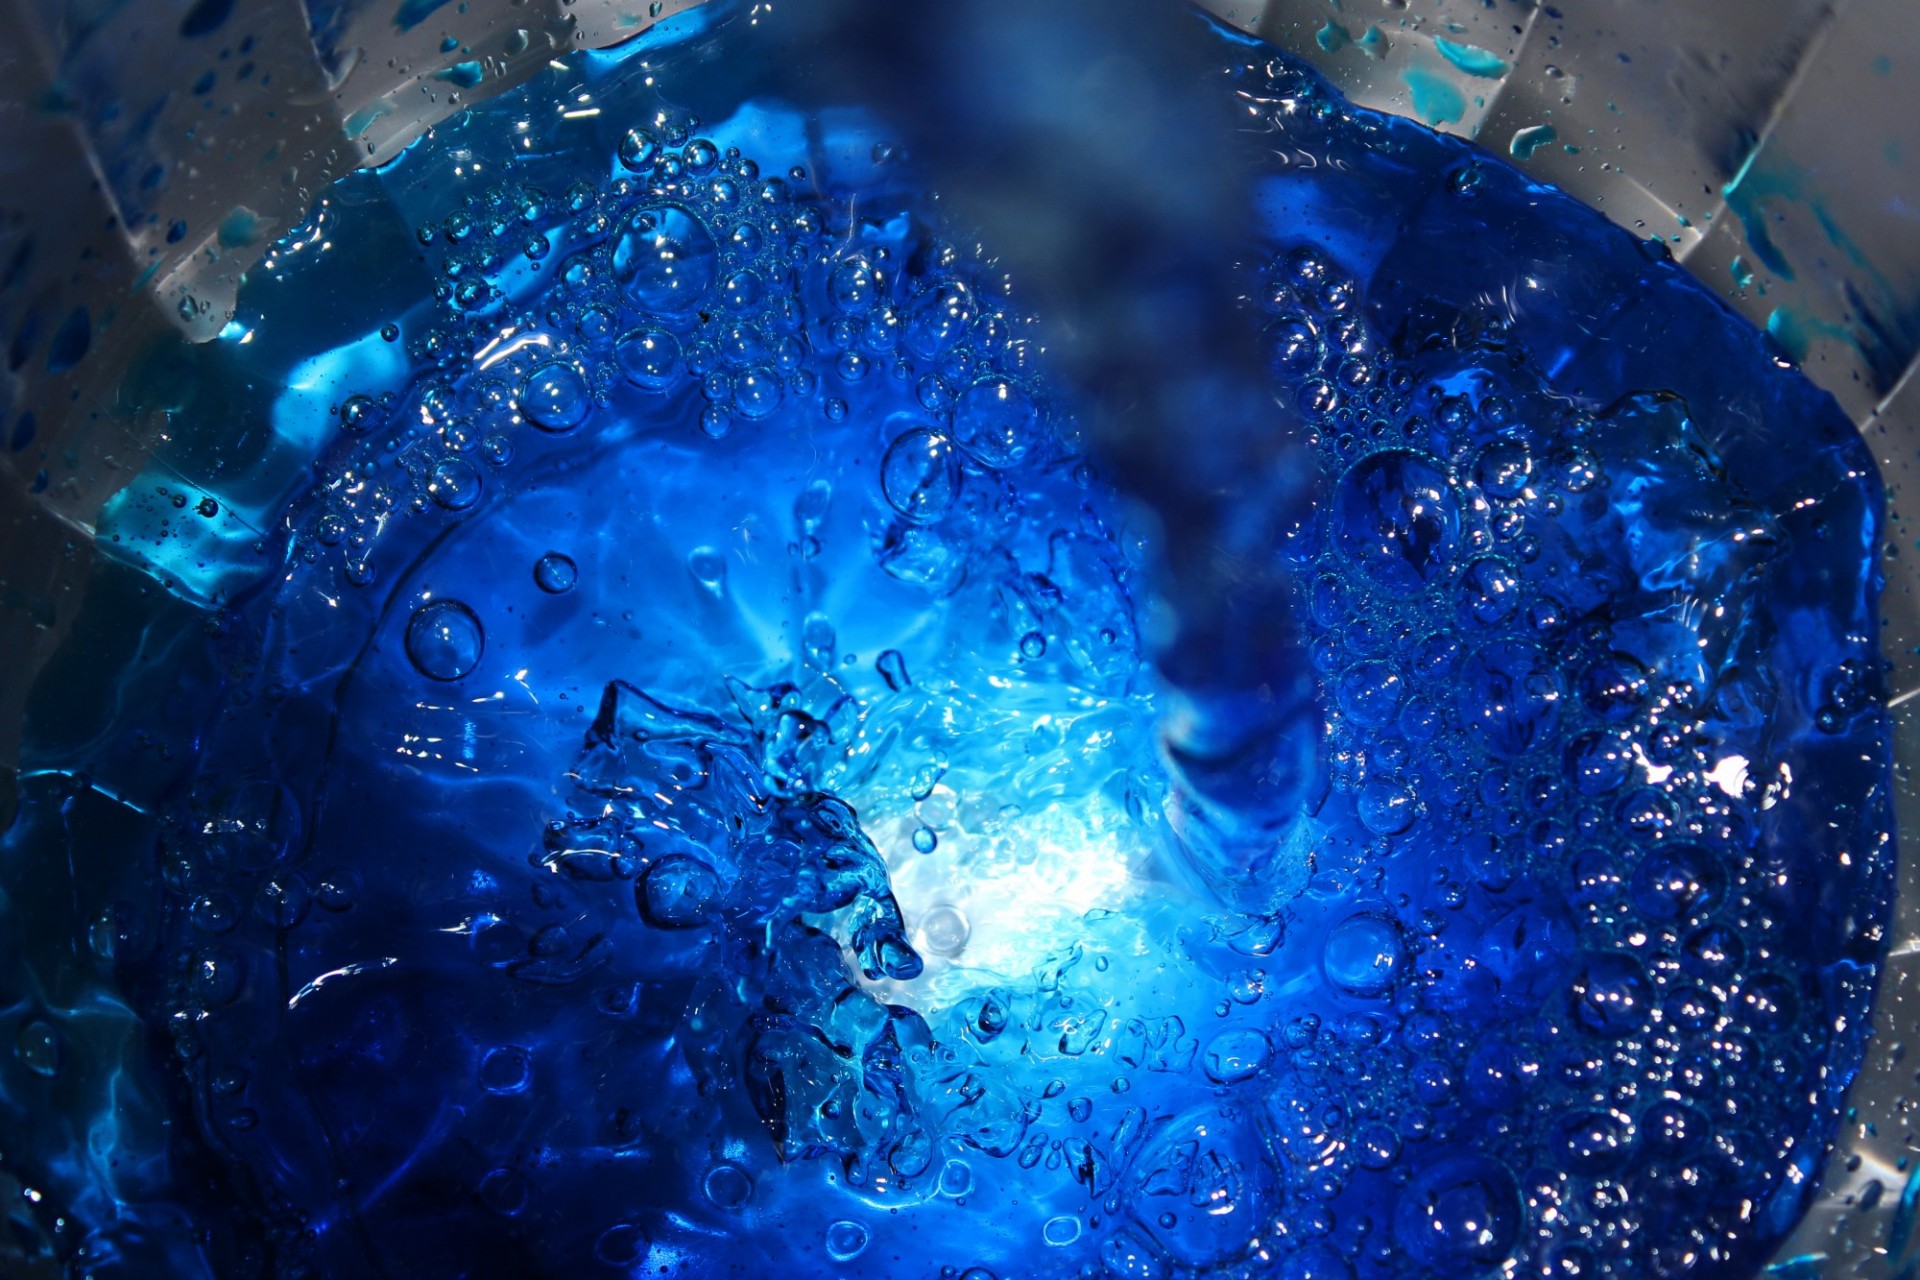 Image of blue water with bubbles and a light source penetrating the center of the water